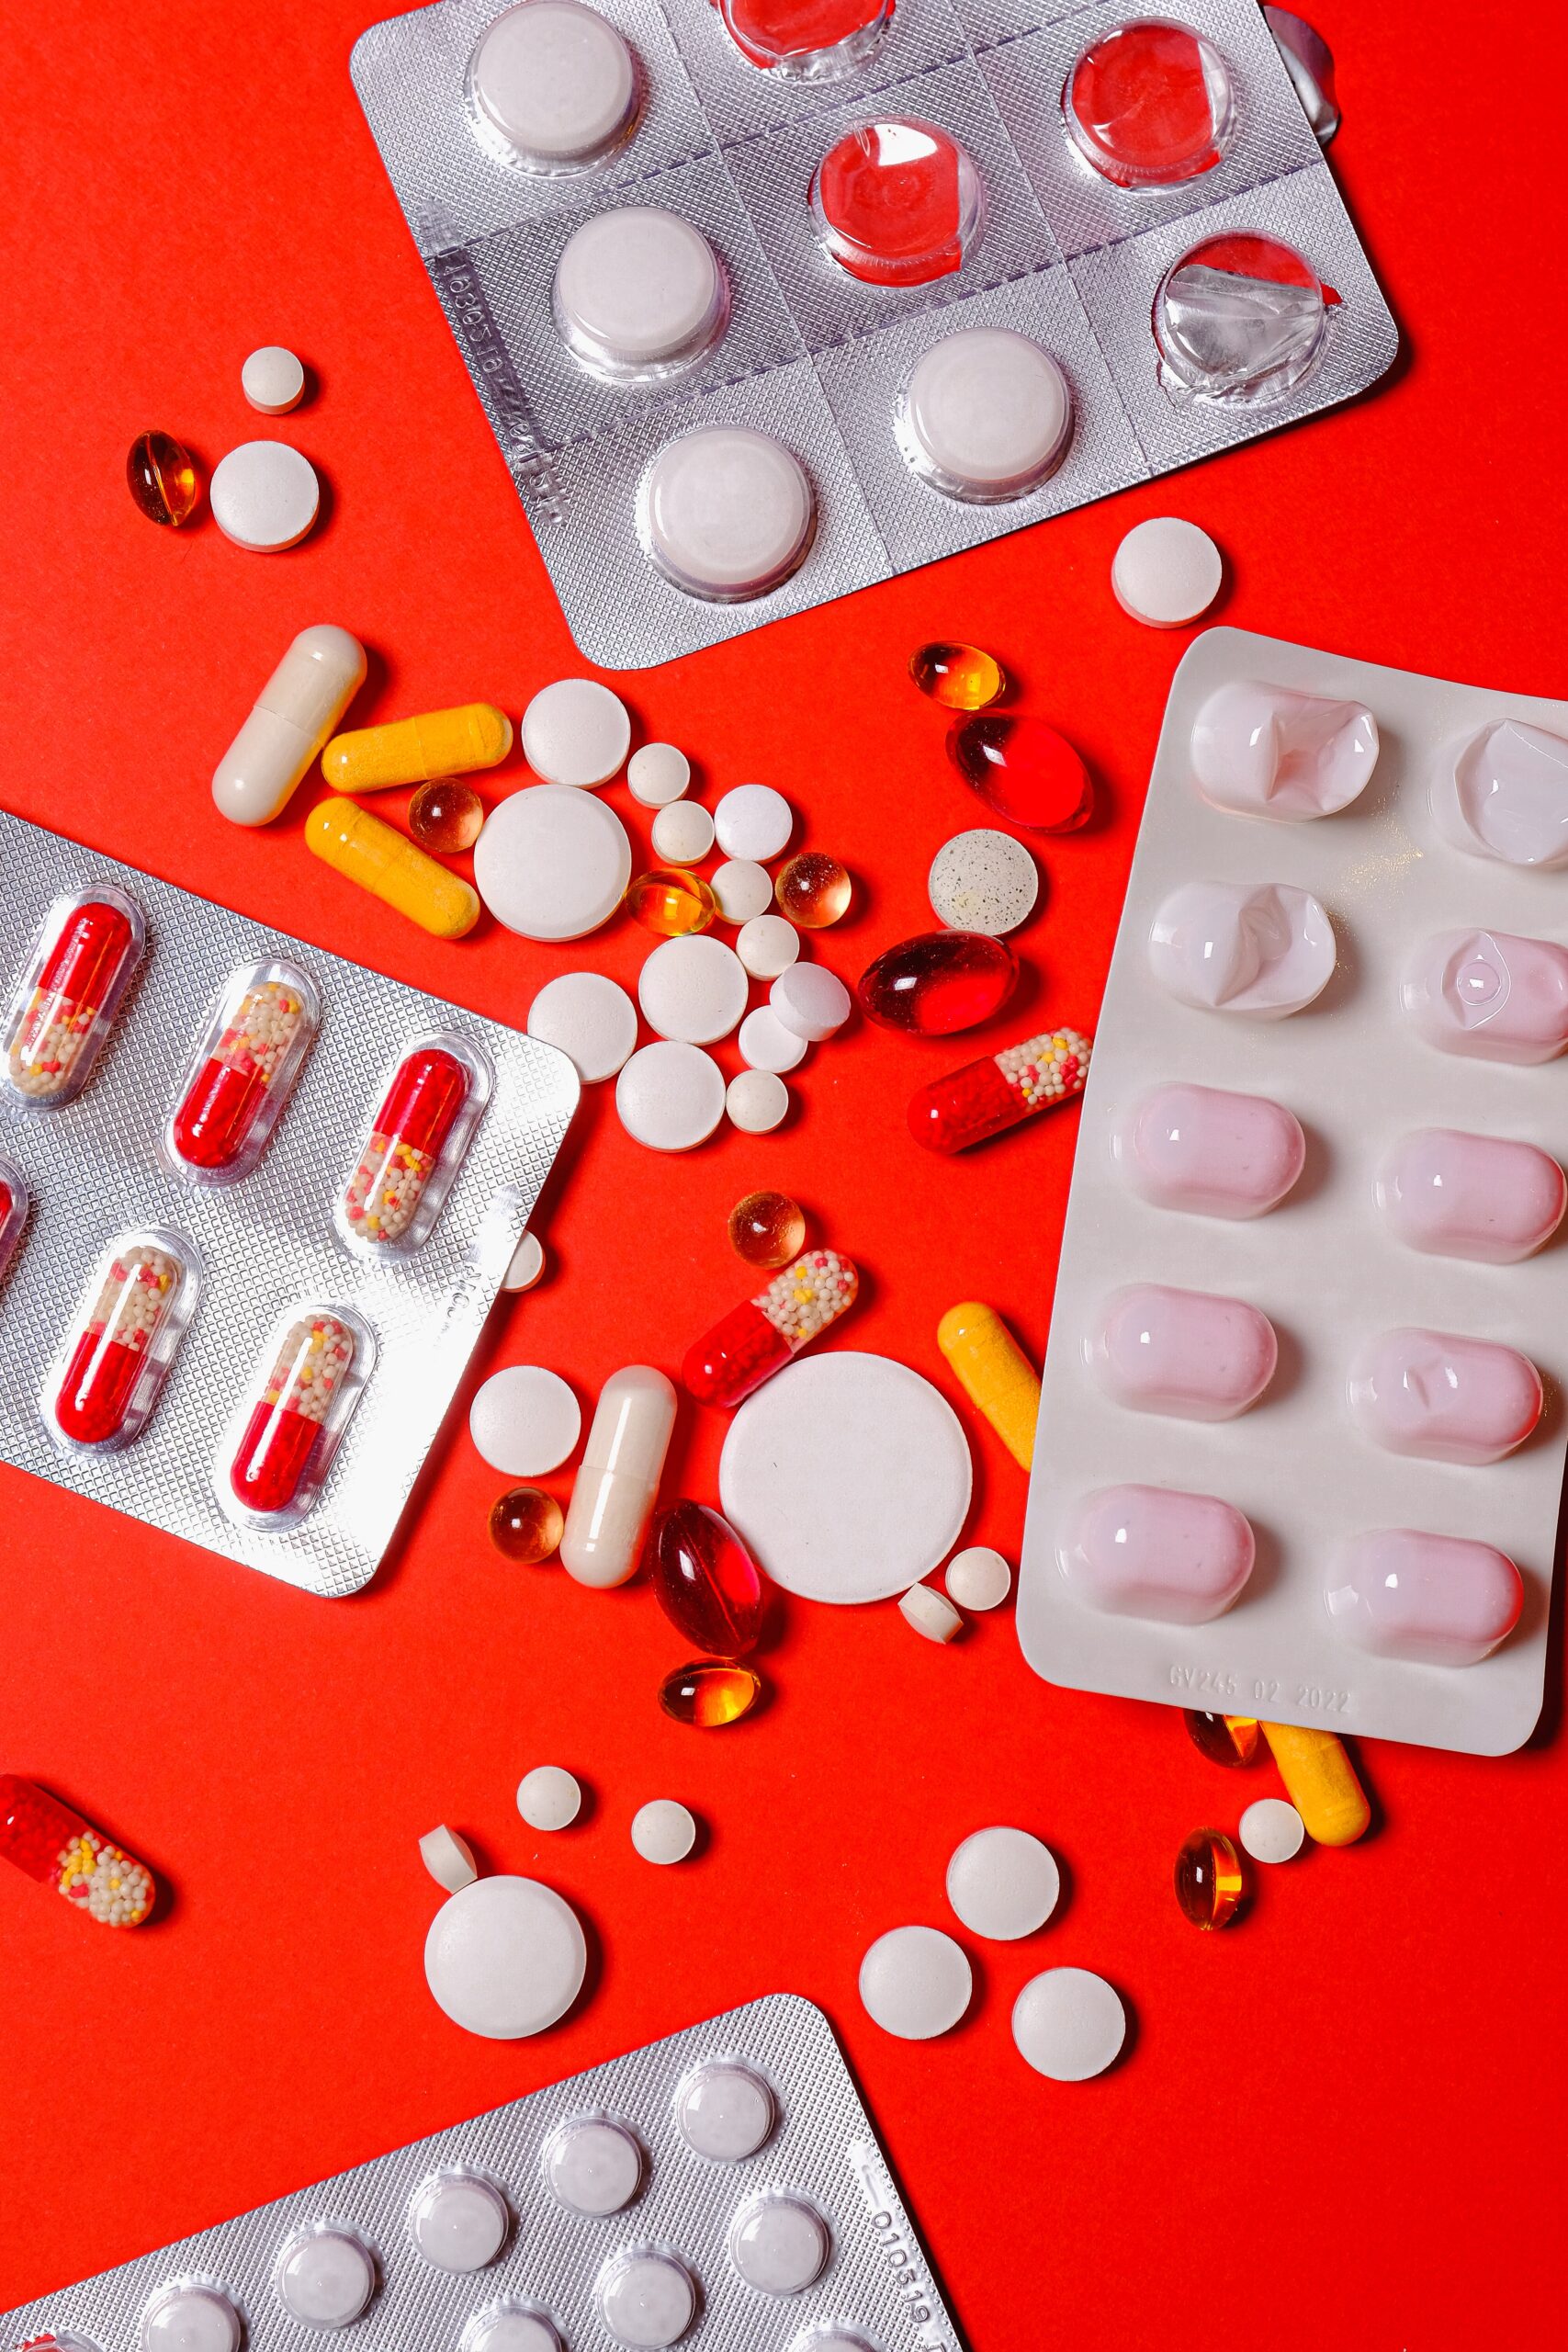 A variety of pills with different shapes and sizes, on a red background.